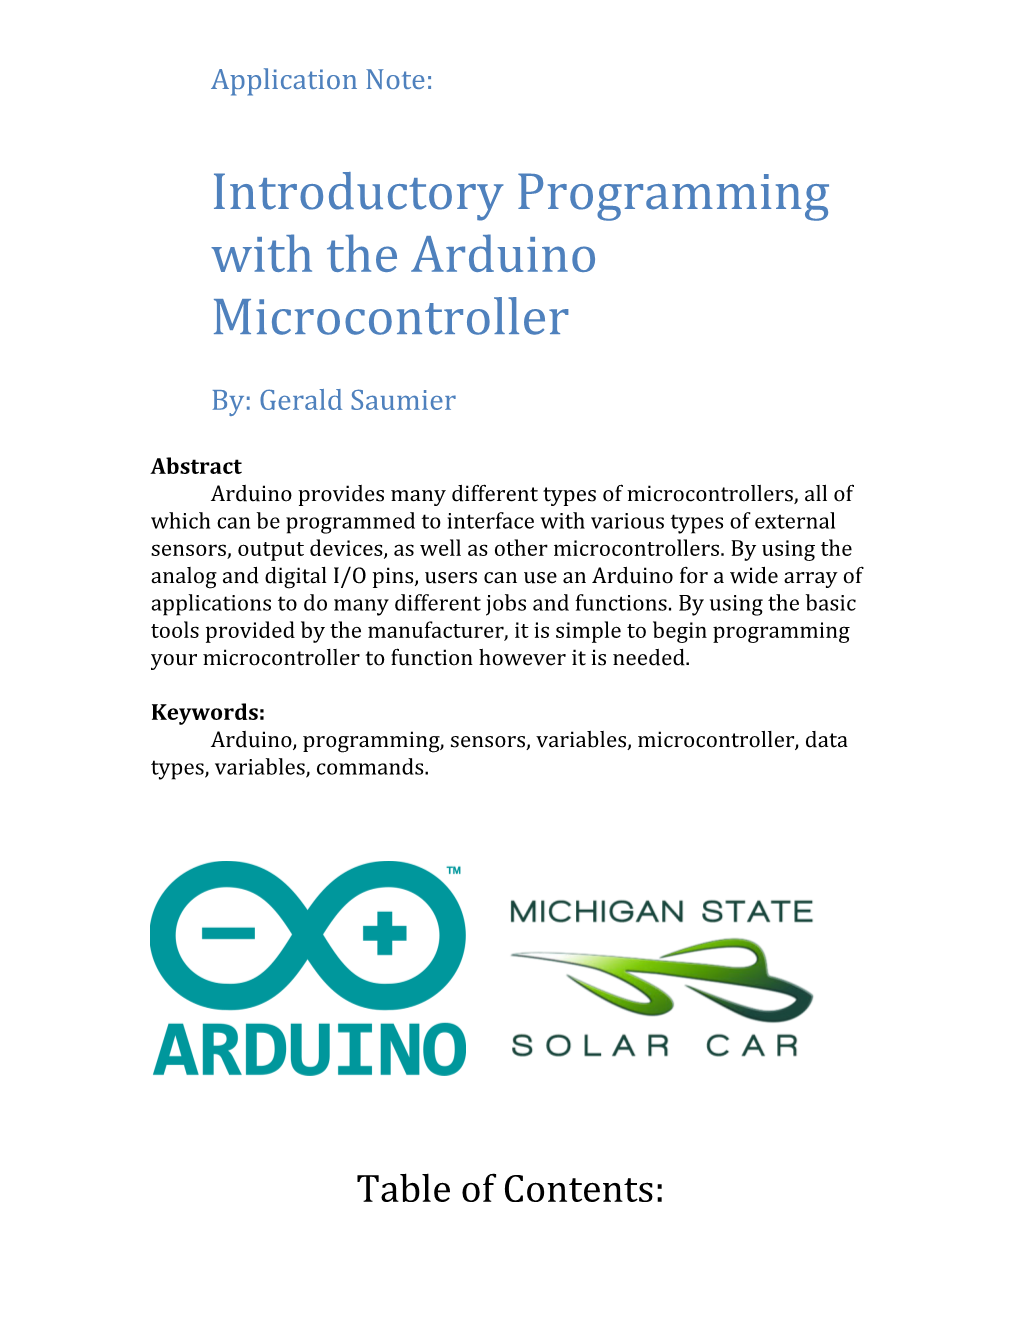 Introductory Programming with the Arduino Microcontroller